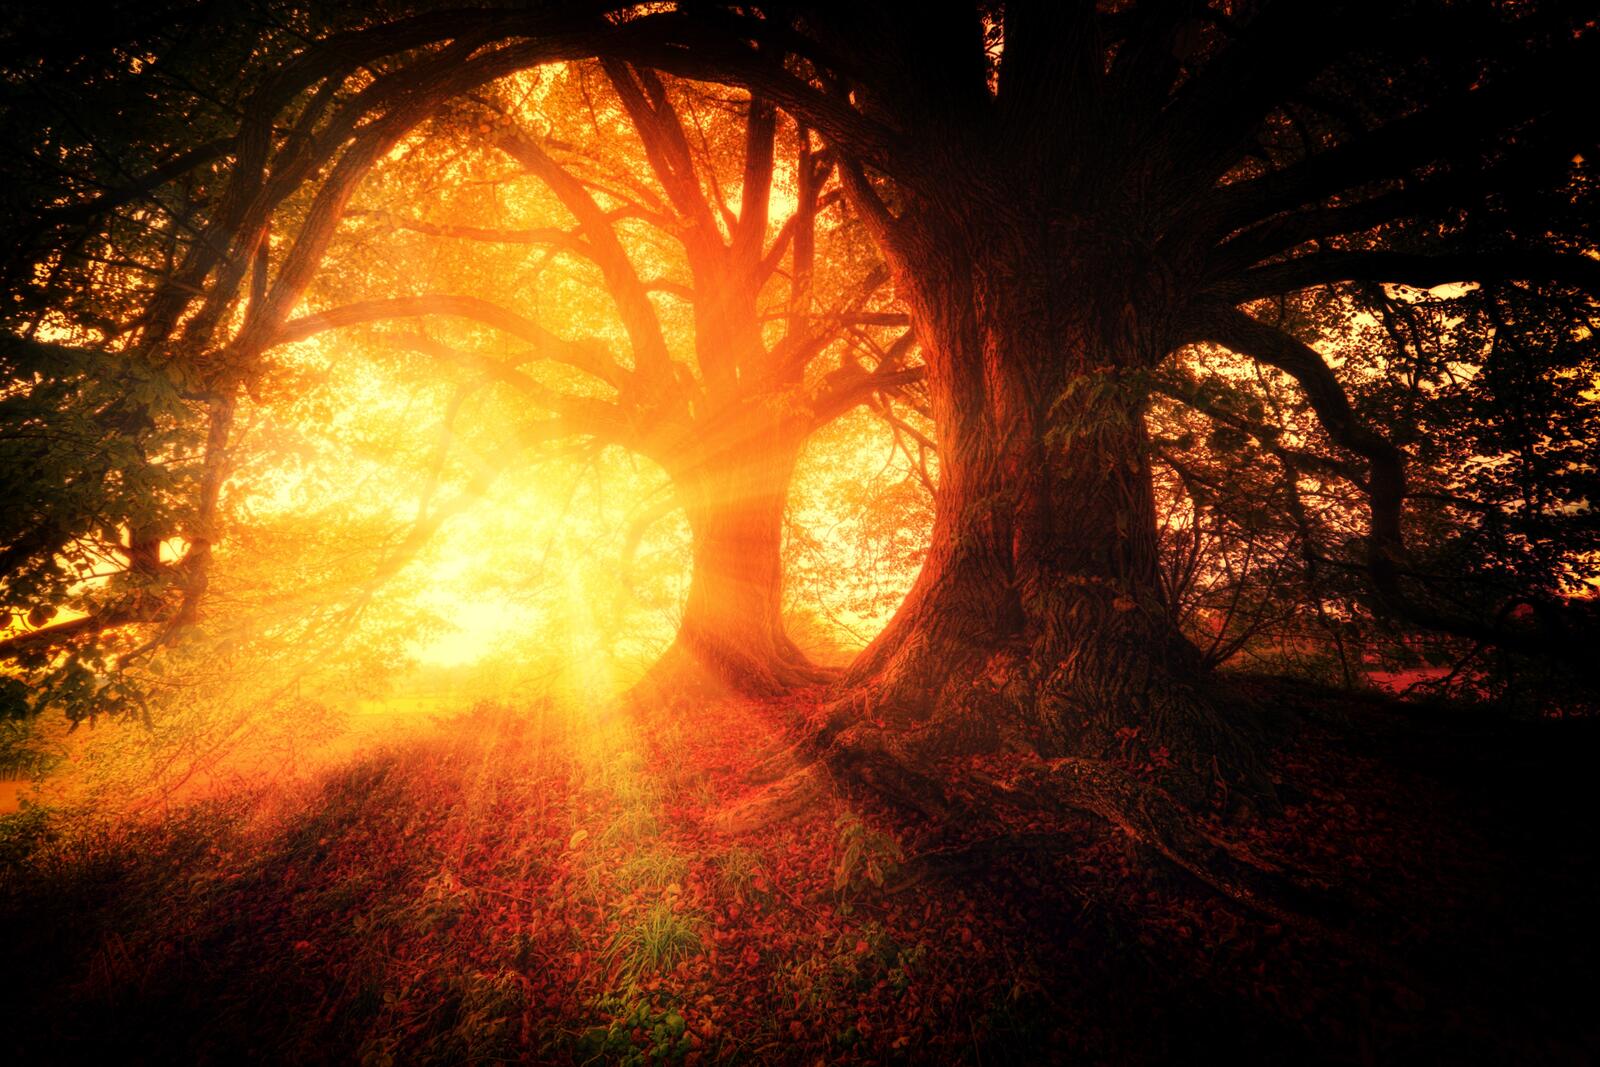 Wallpapers nature forest sunbeam on the desktop